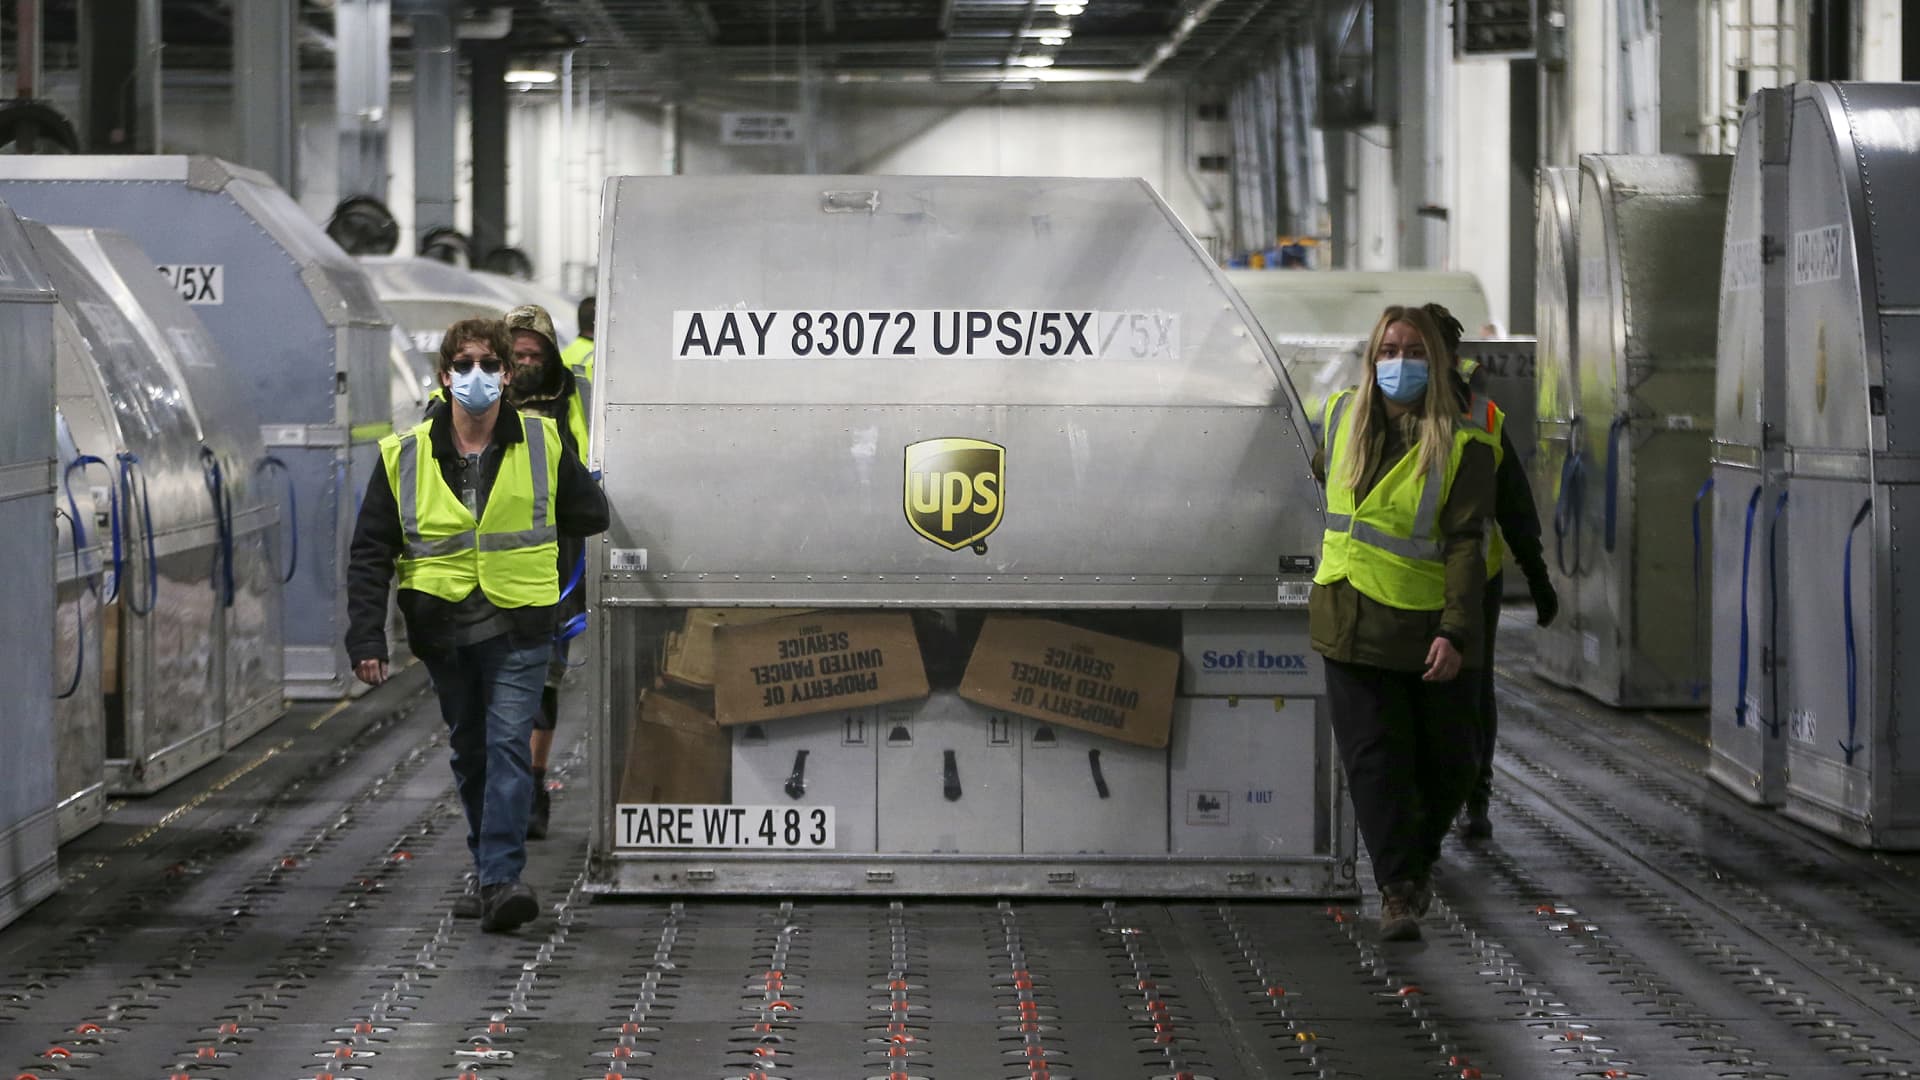 UPS employees move one of two shipping containers containing the first shipments of the Pfizer and BioNTech Covid vaccine inside a sorting facility at UPS Worldport on December 13, 2020 in Louisville, Kentucky.